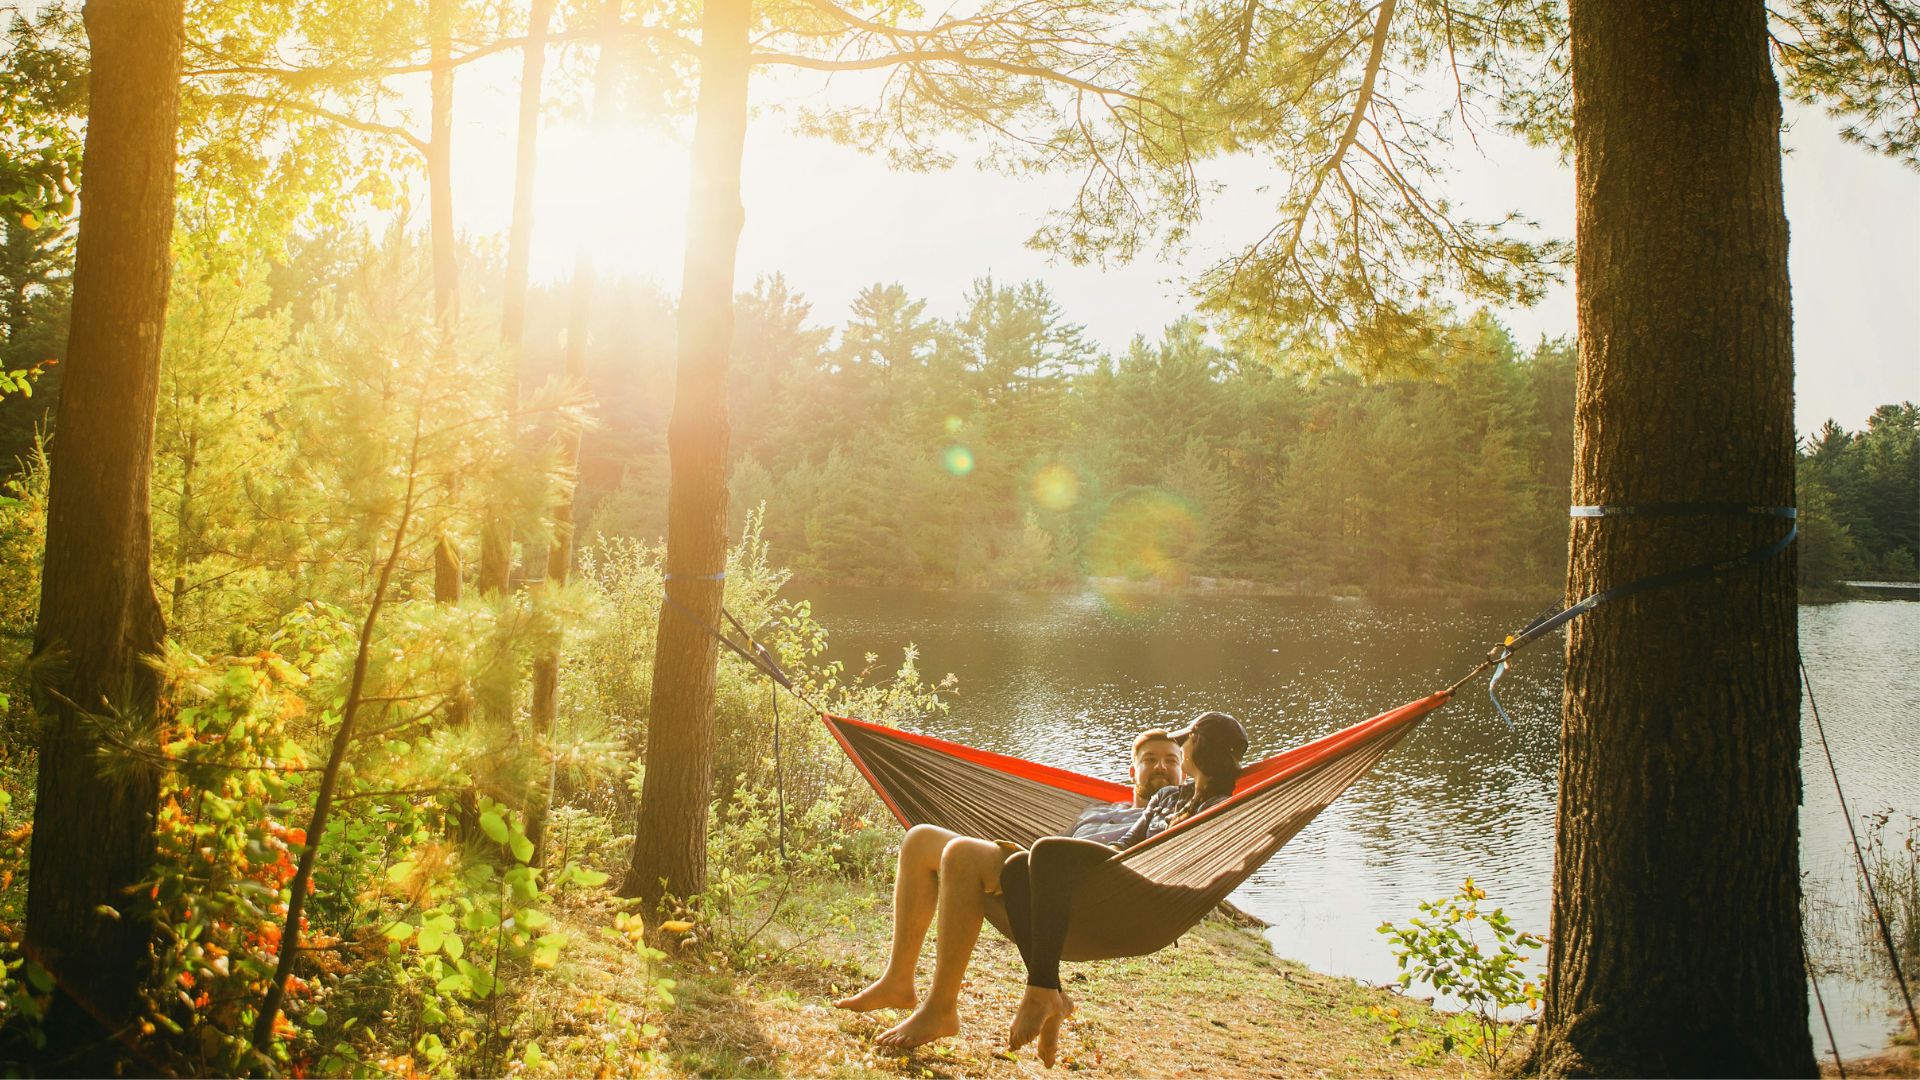 Two people sit on a hammock hanging between two trees alongside a body of water. They are quite relaxed, perhaps after enjoying some cannabis.